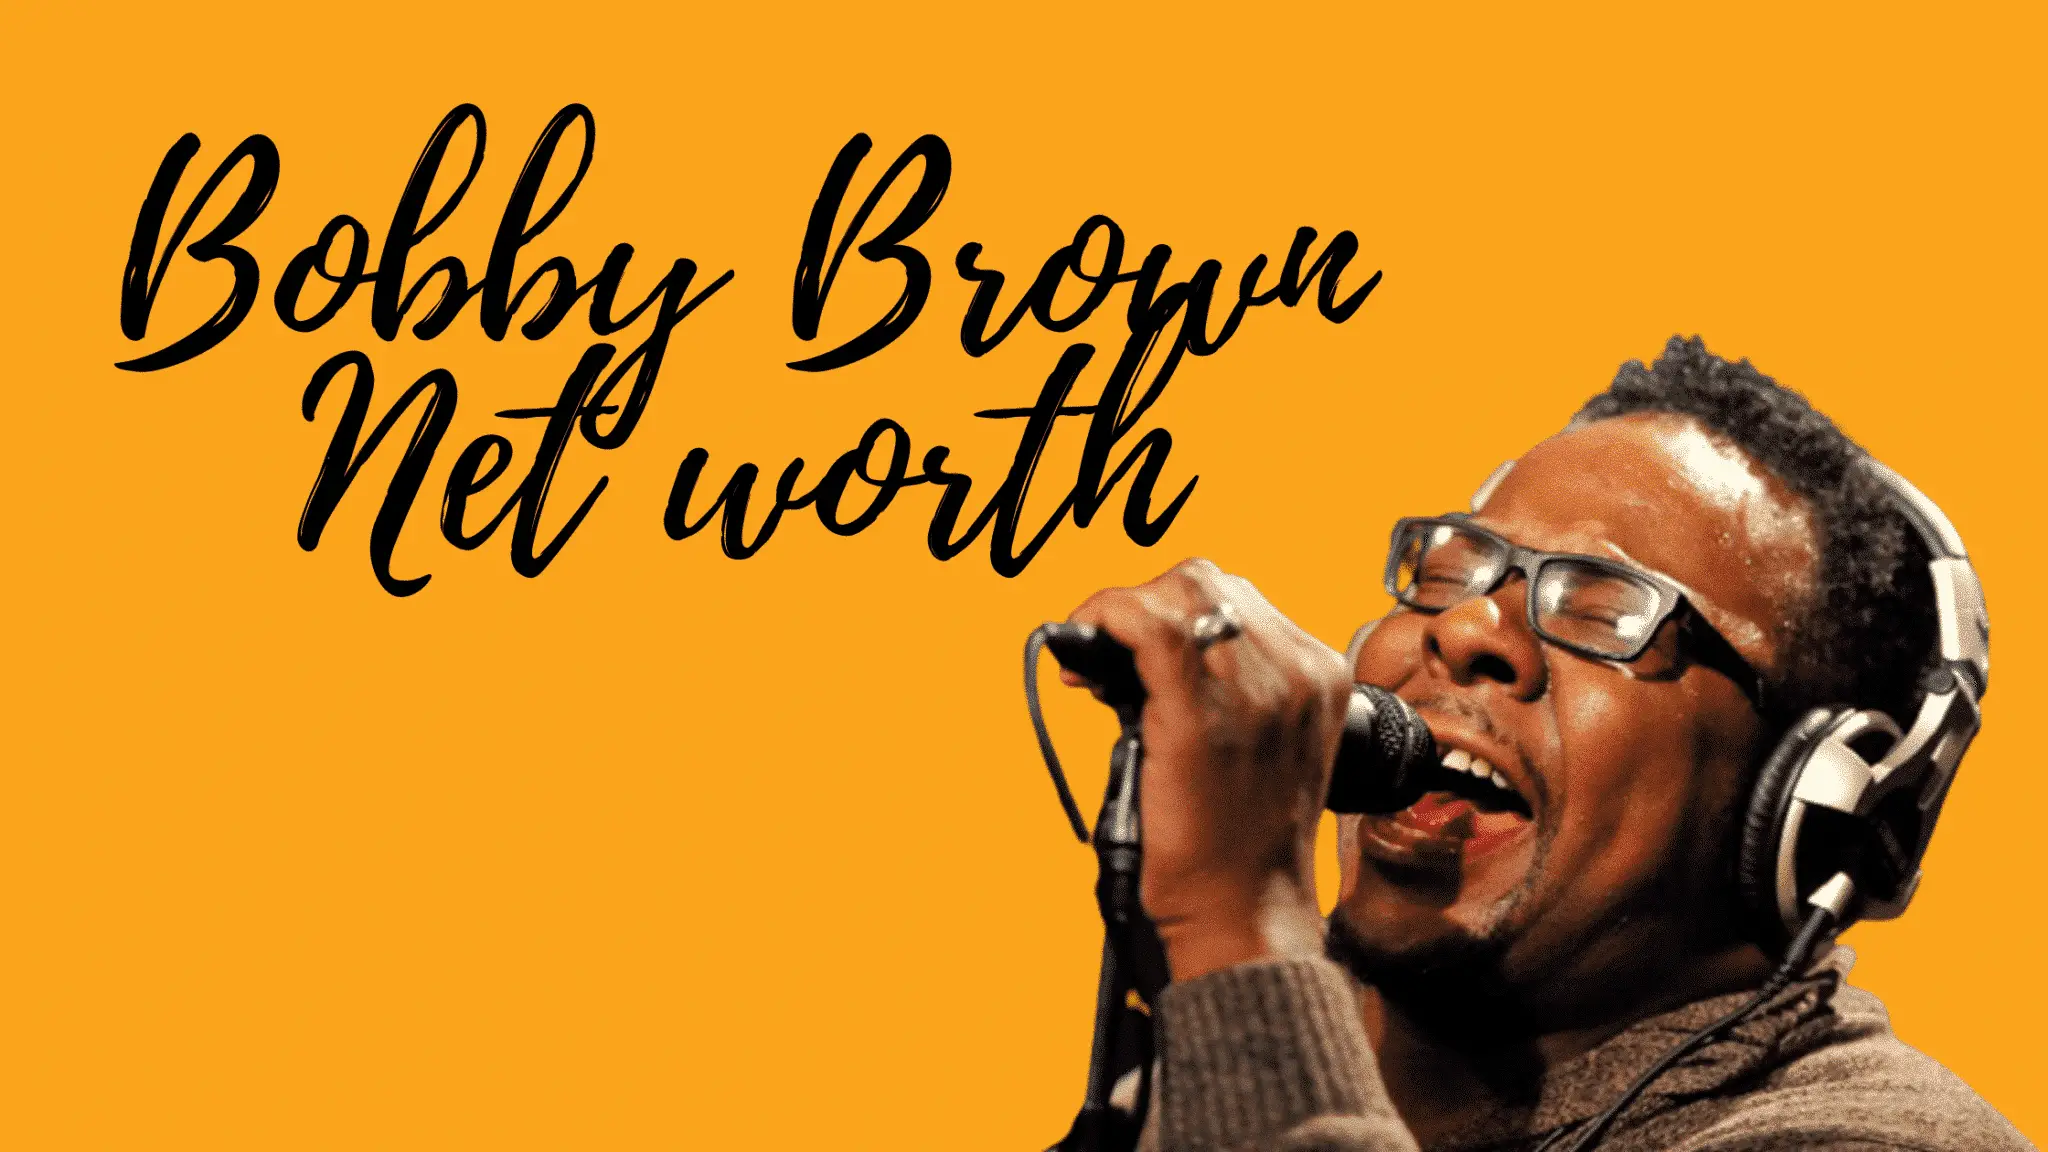 Bobby Brown Net worth – Bio And Interesting Facts